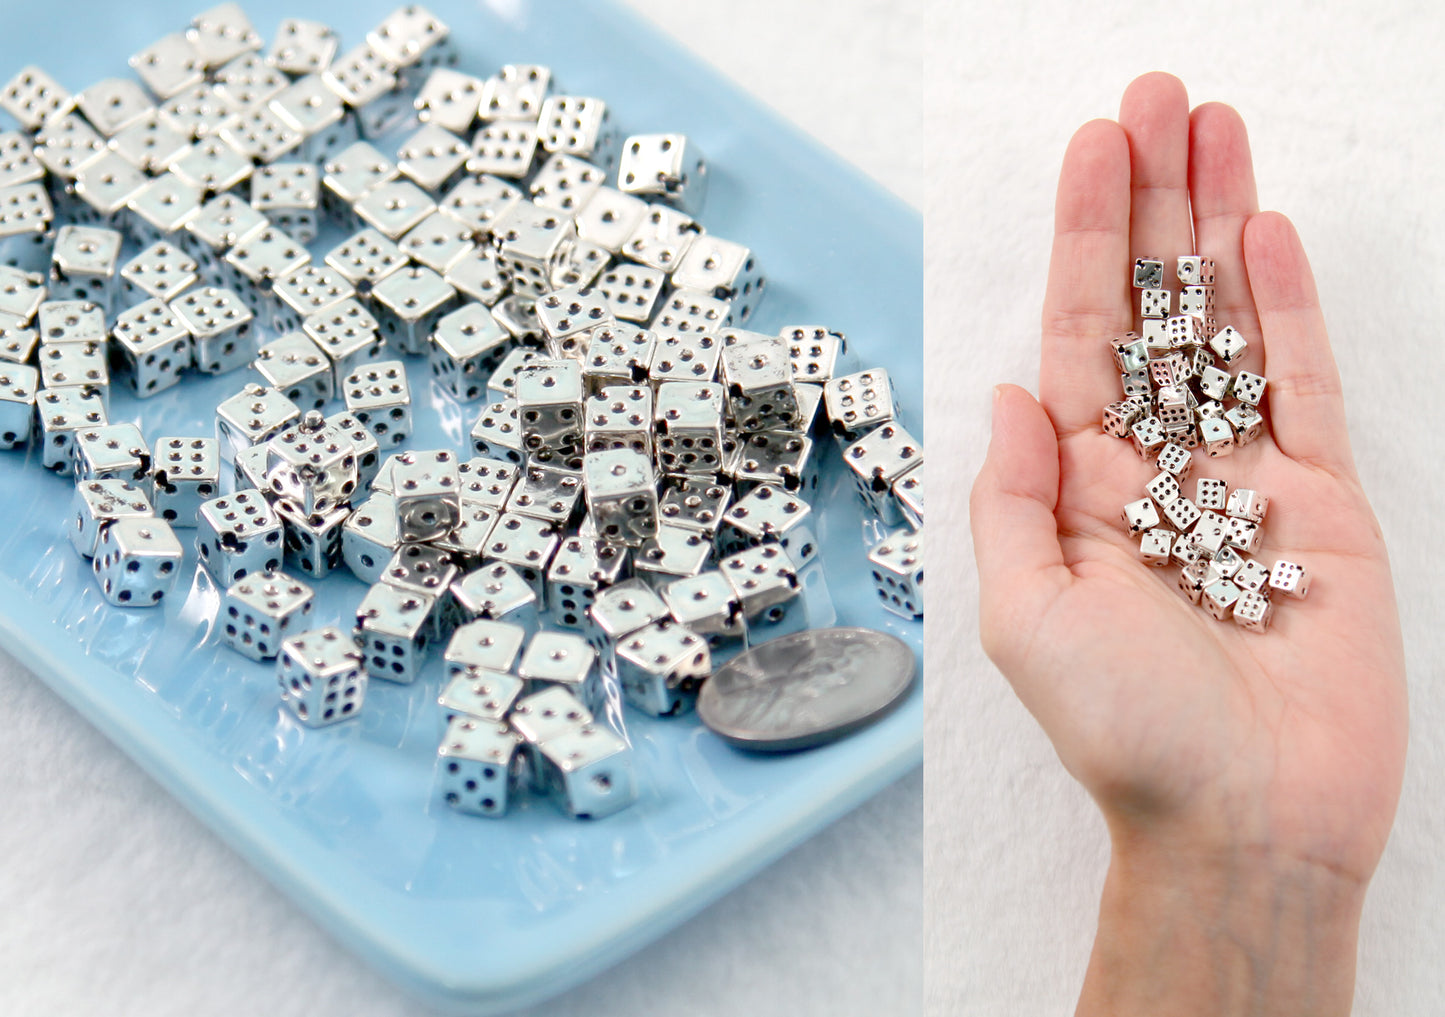 Tiny Dice Beads - 6mm Electroplated Silver Color Dice Diagonal Hole Plastic Beads - 120 pc set